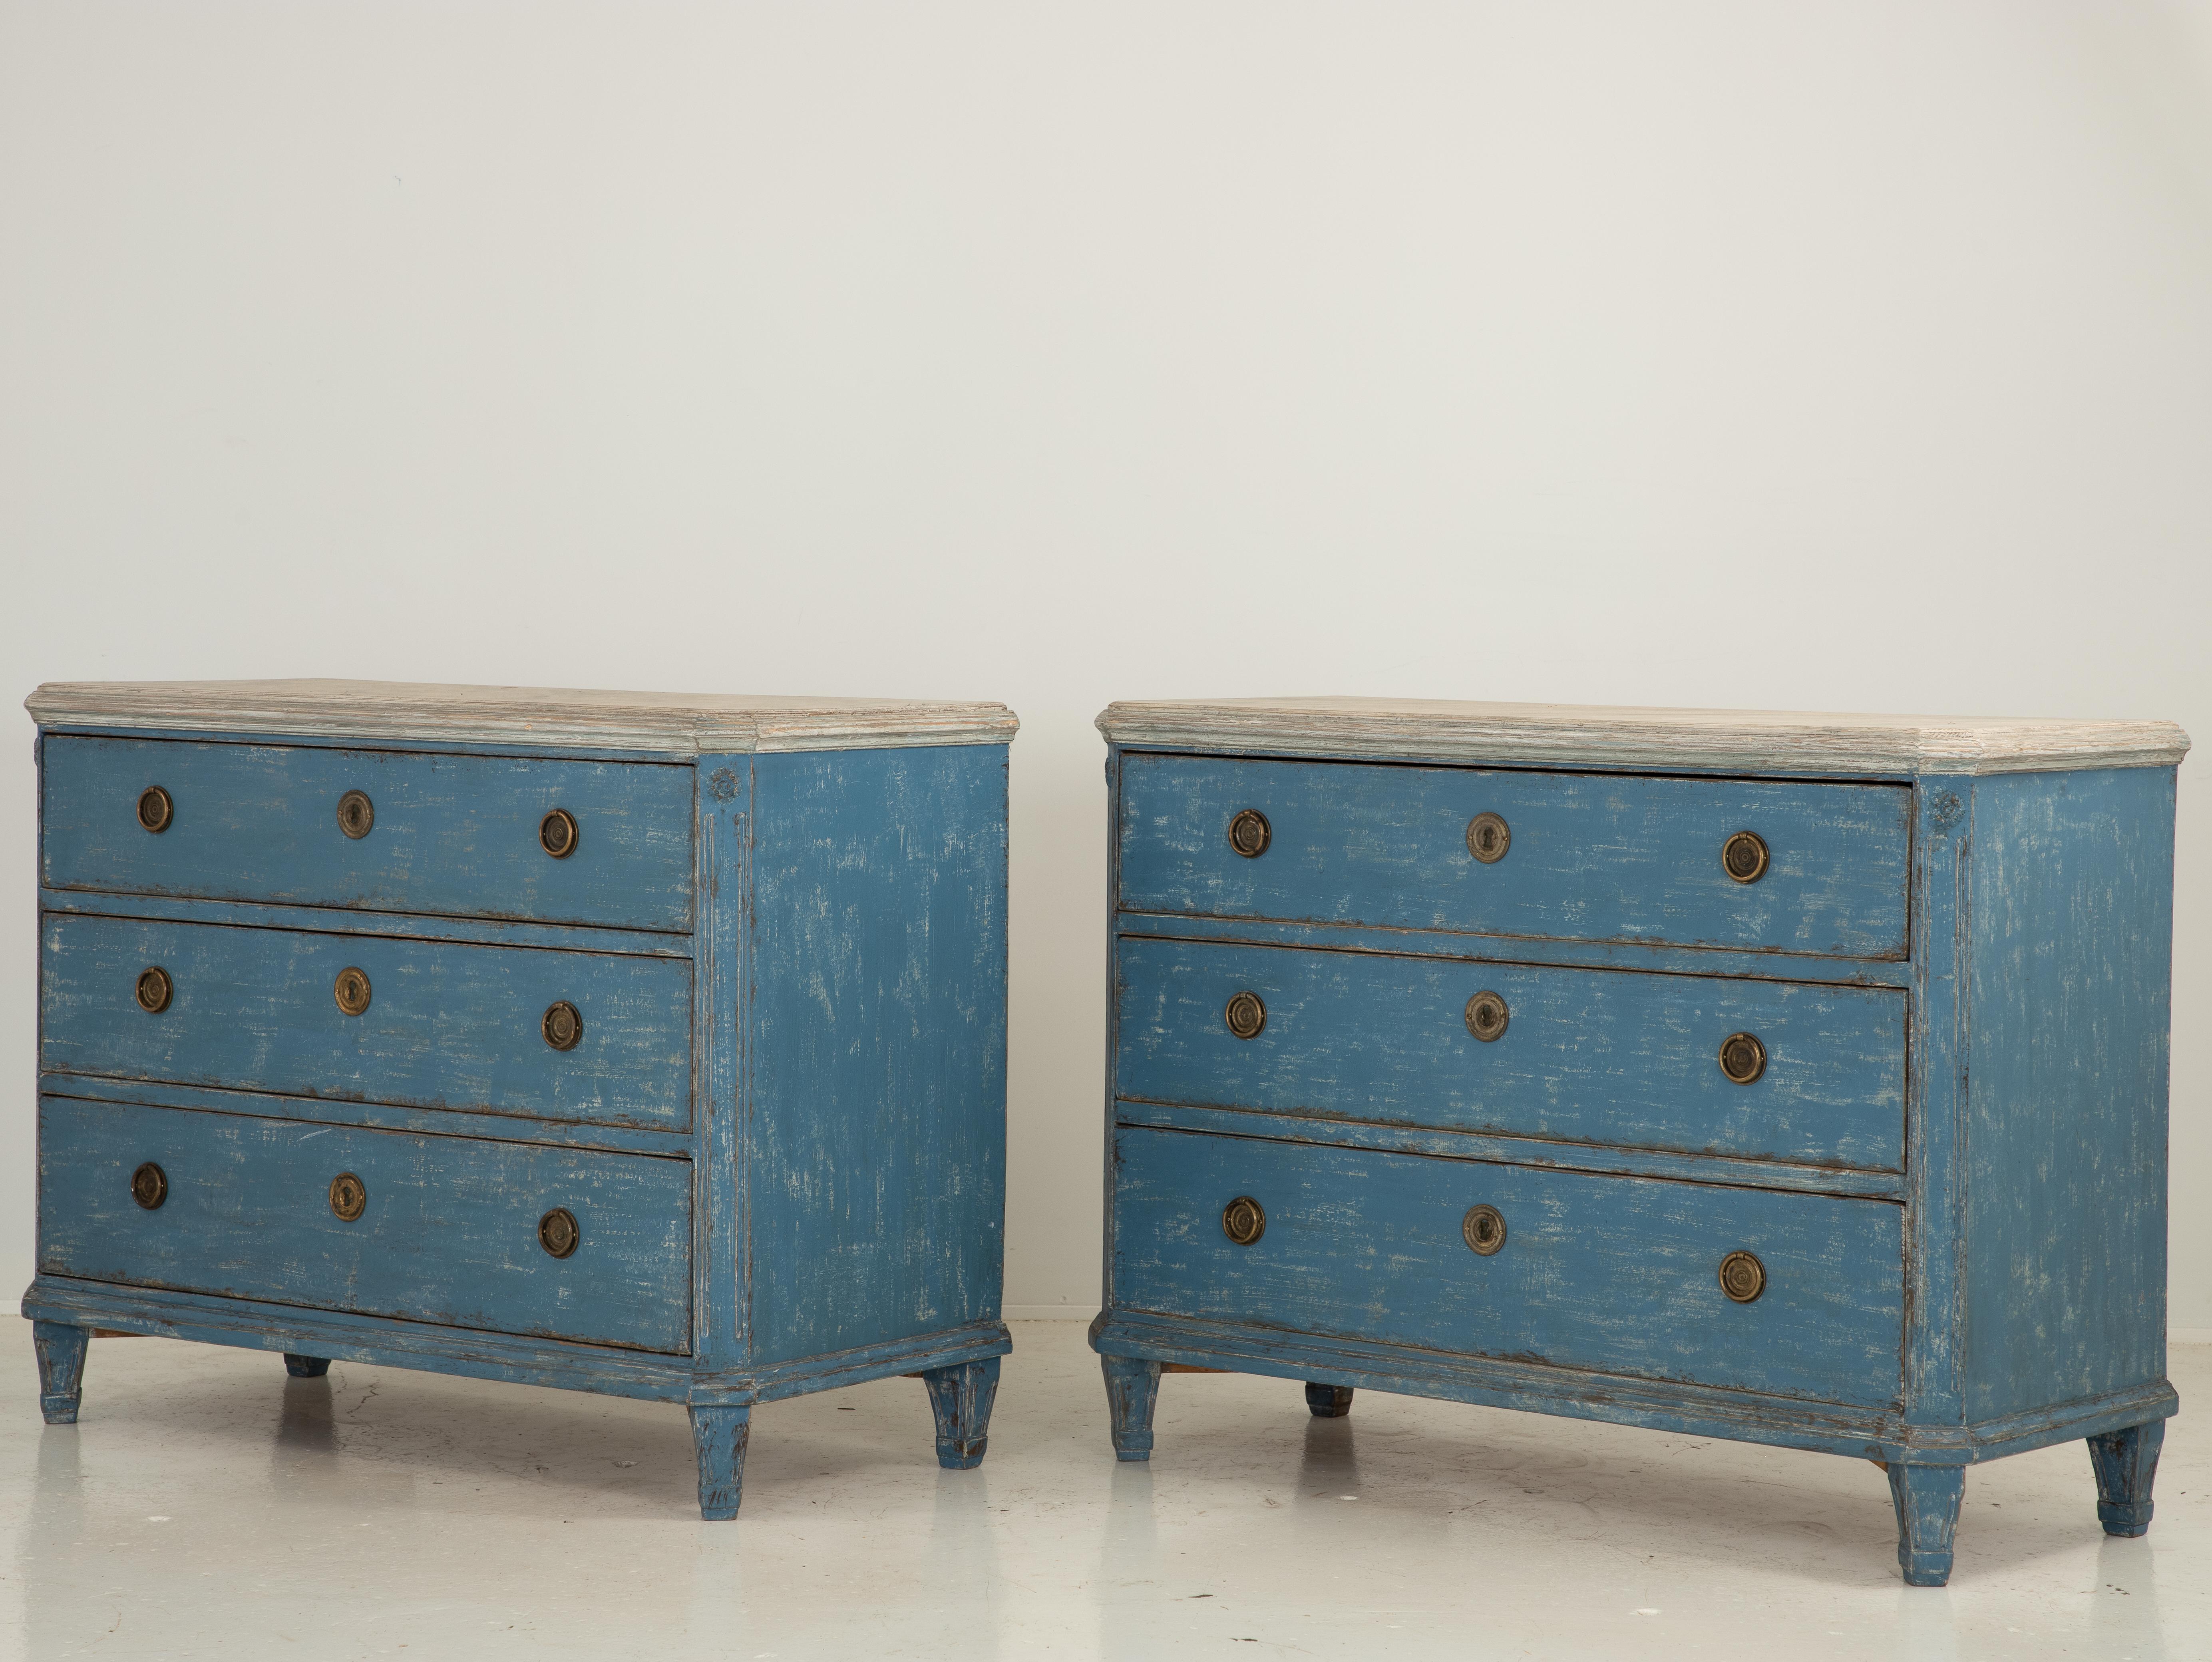 A late 19th or early 20th century pair of painted Gustavian style commodes. Each commode has three drawers with brass ring pulls. Canted corner with a rosette motif and a fuax marble finish top sets this off as distinctly Gustavian in style.